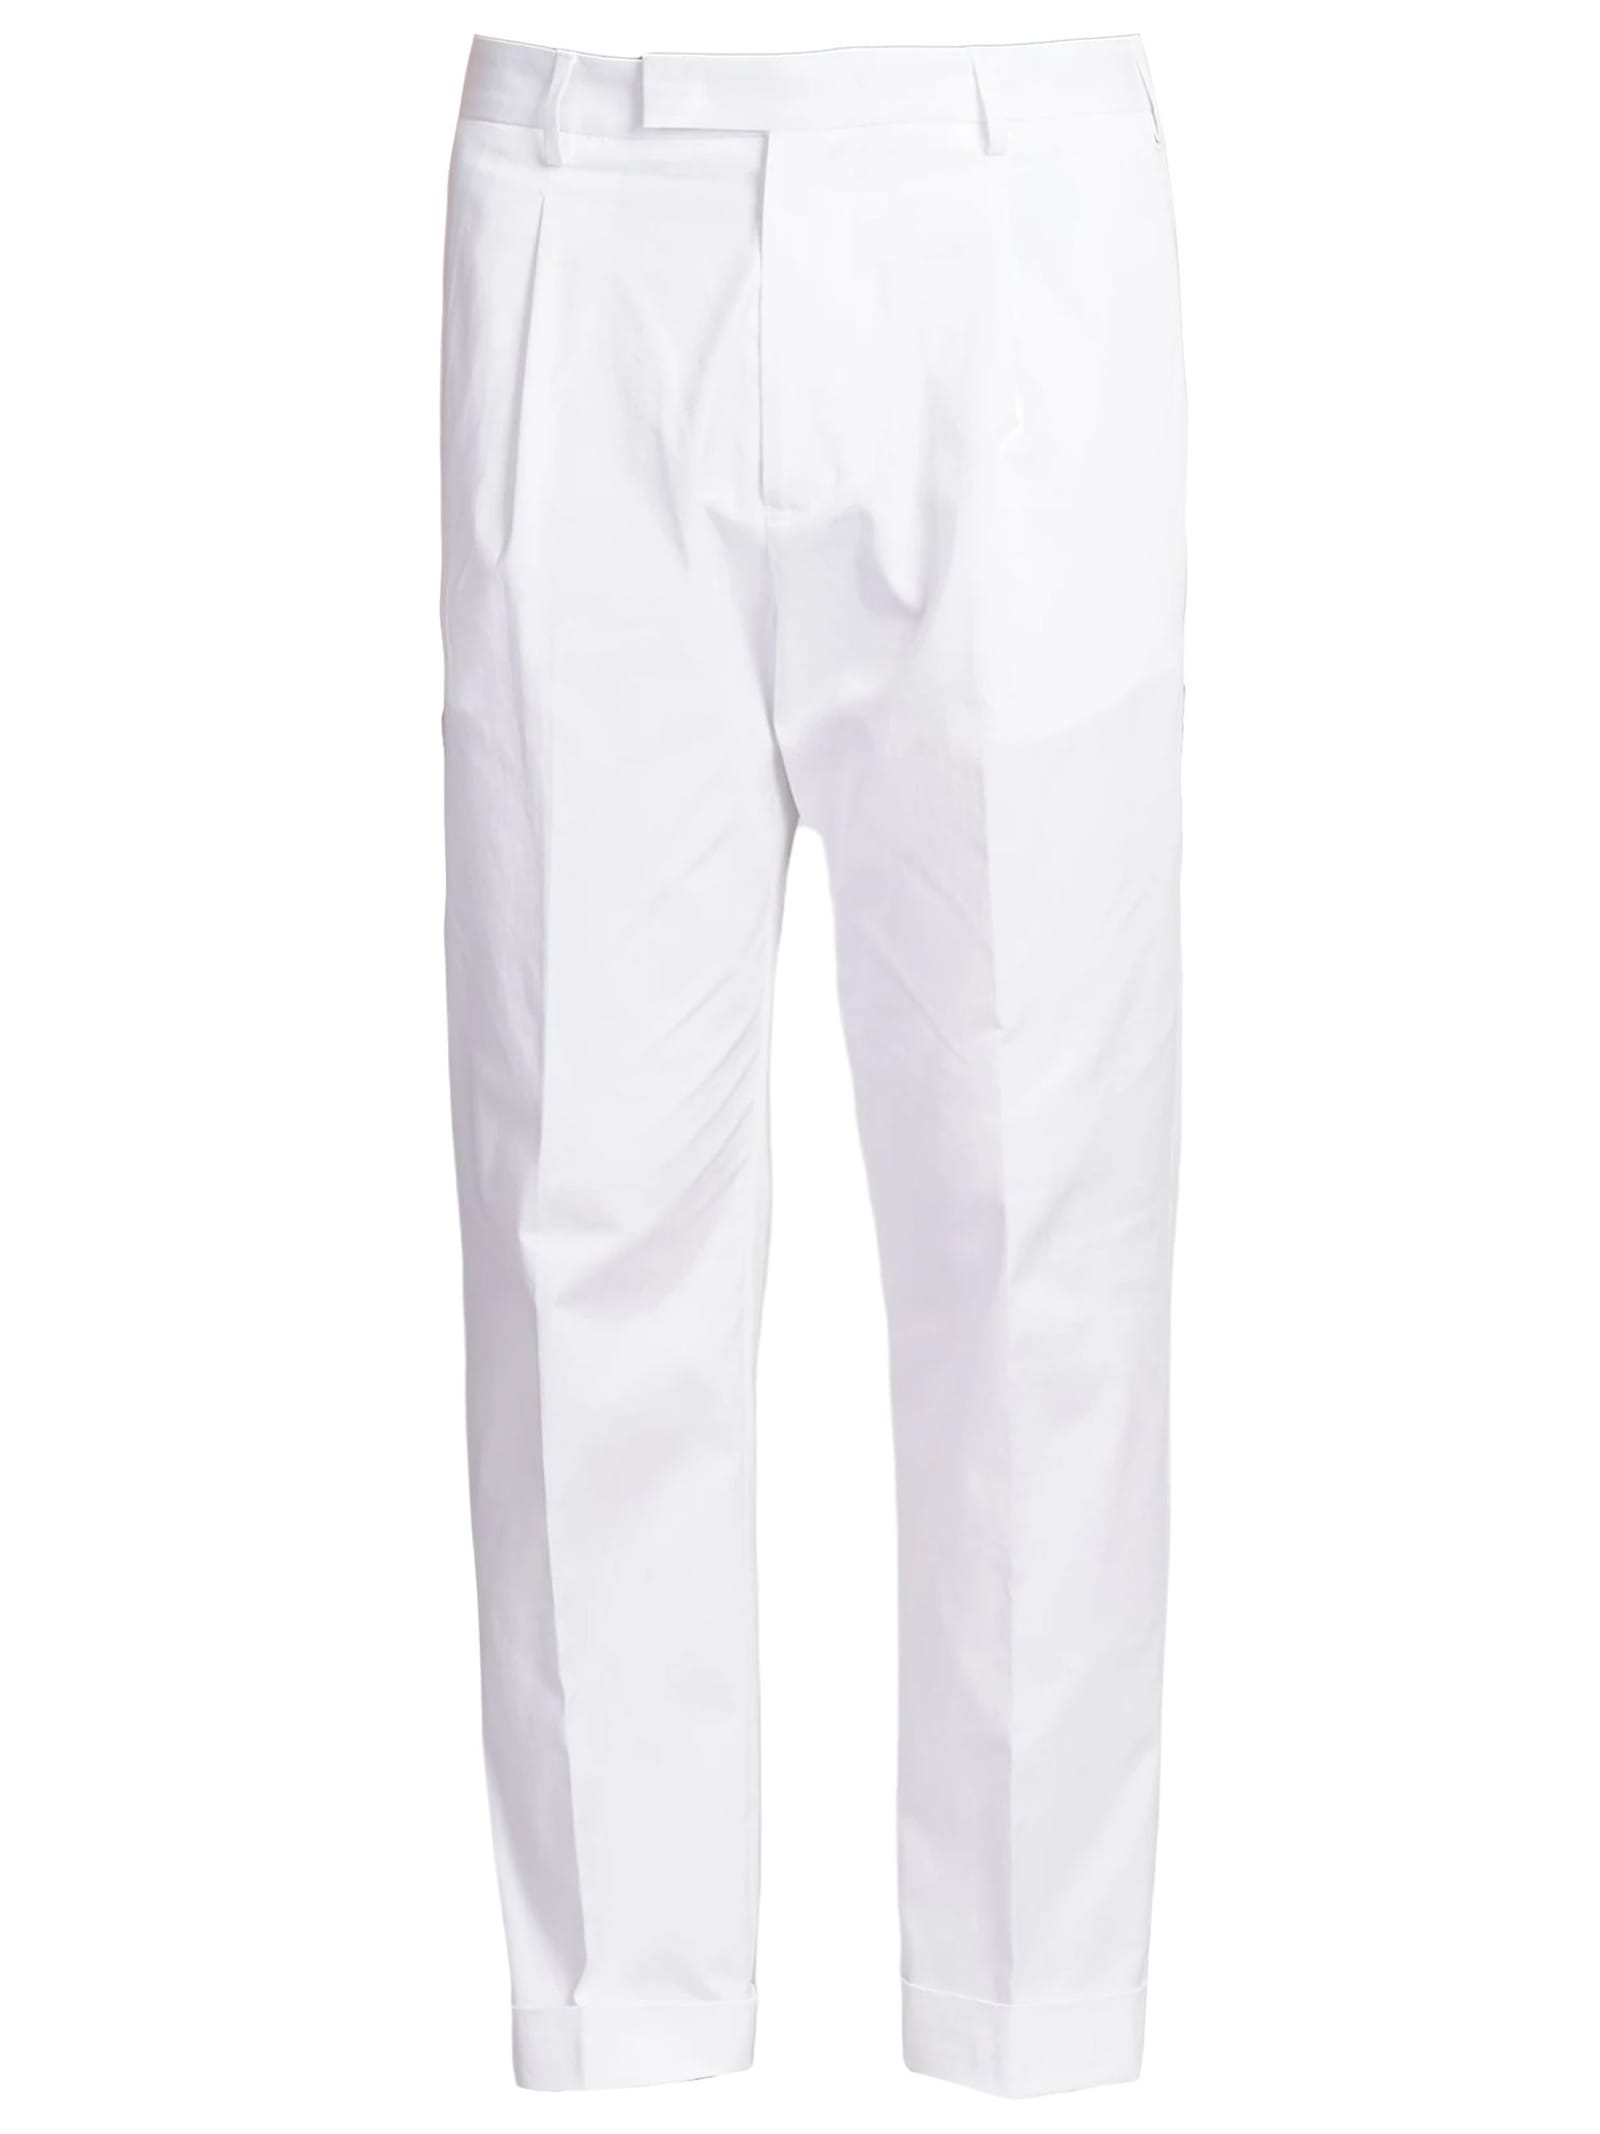 Shop Low Brand Trousers White